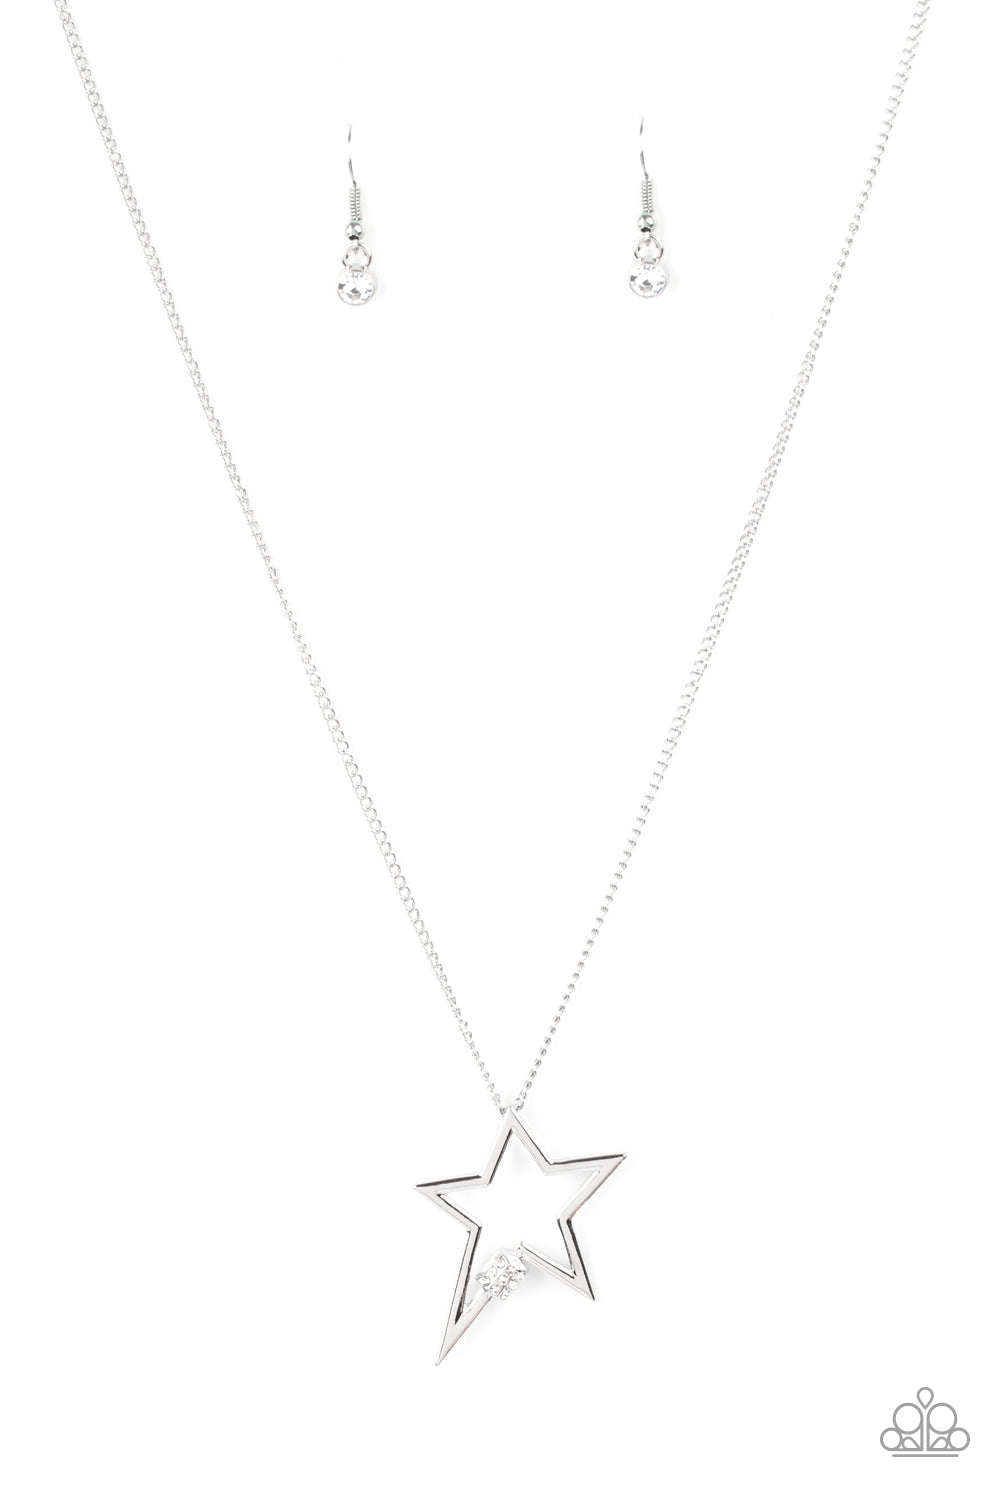 Light Up The Sky Necklace (Gold, Silver, White)